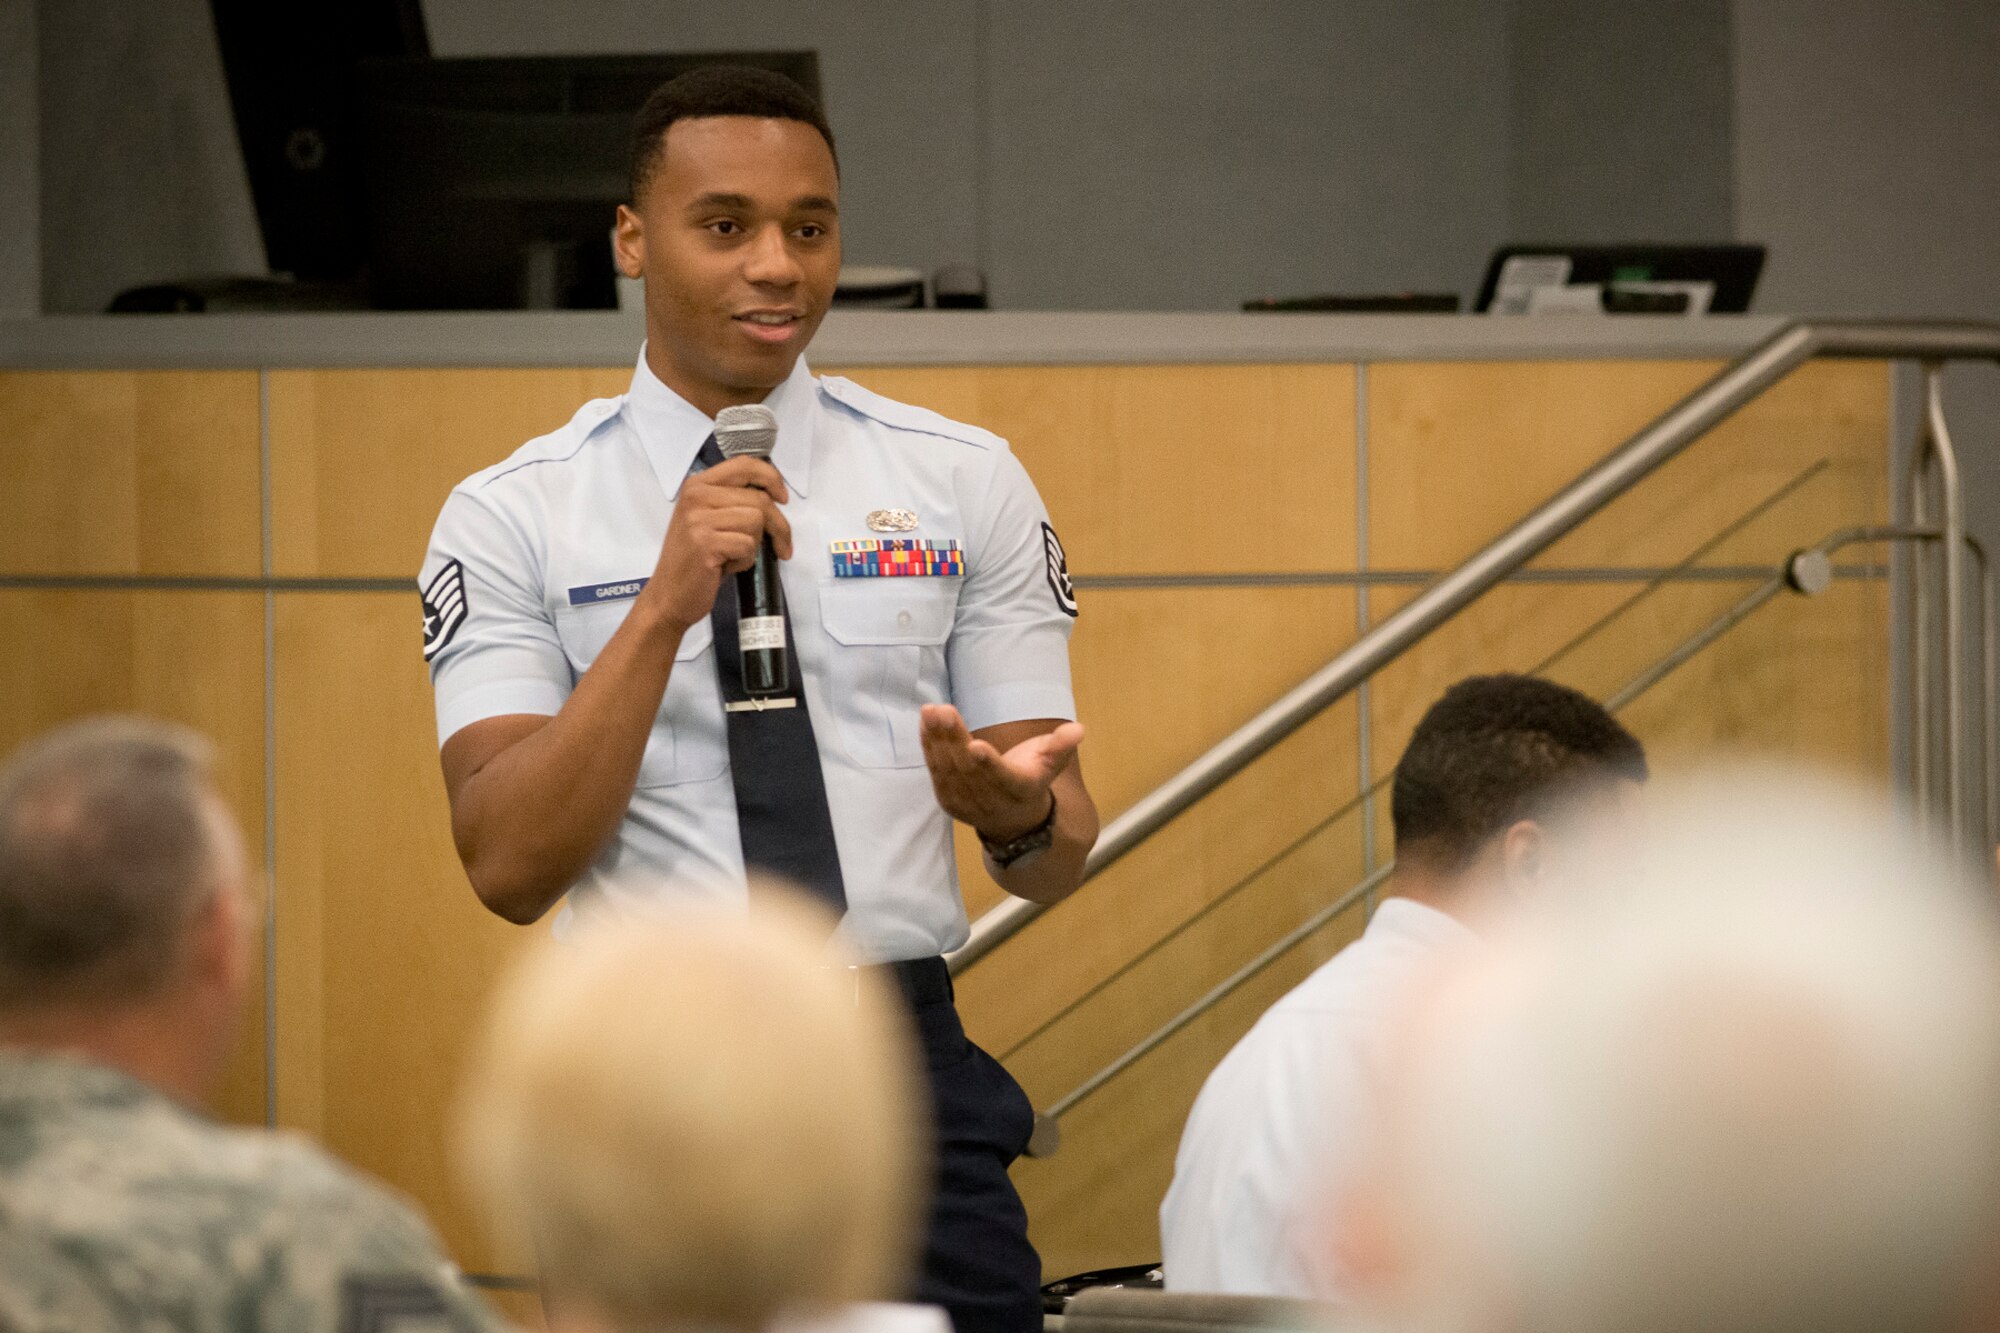 Staff Sgt. Wilson Gardner, one of the Air National Guard Outstanding Airmen of the Year attended the Chief's Executive Course at the ANG Readiness Center, Joint Base Andrews, Md., August 7, 2018, where he addressed the chiefs panel, sharing his thoughts on issues facing the enlisted members of the force. (U.S. Air National Guard photo by Master Sgt. Marvin Preston).